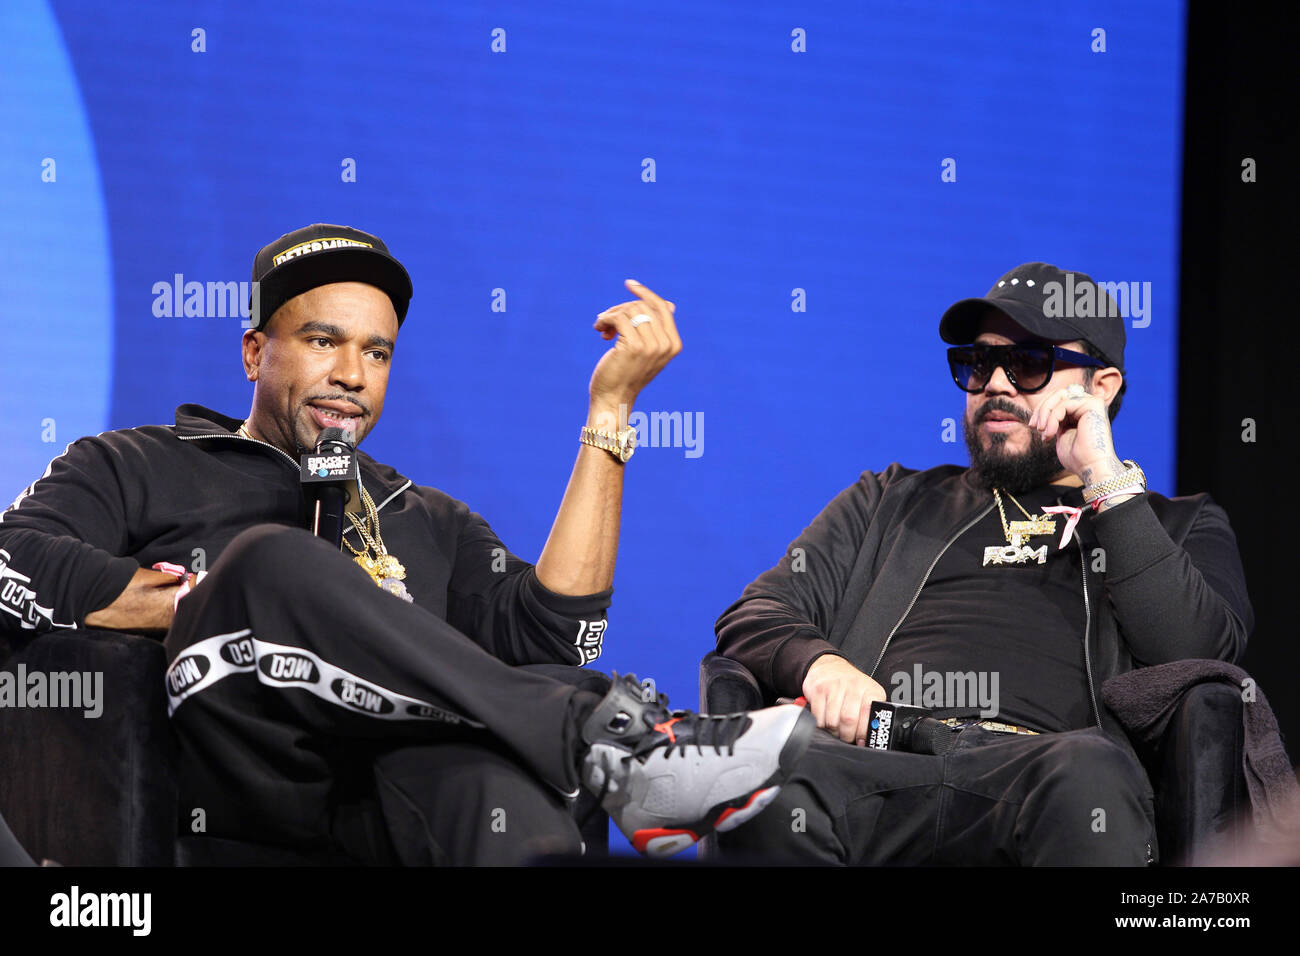 Leading the Latin Culture panel with Carlos 'Spiff TV' Suarez and N.O.R.E. at the Revolt Summit x AT&T LA on October 25, 2019 at Magic Box in Los Angeles, California. Stock Photo